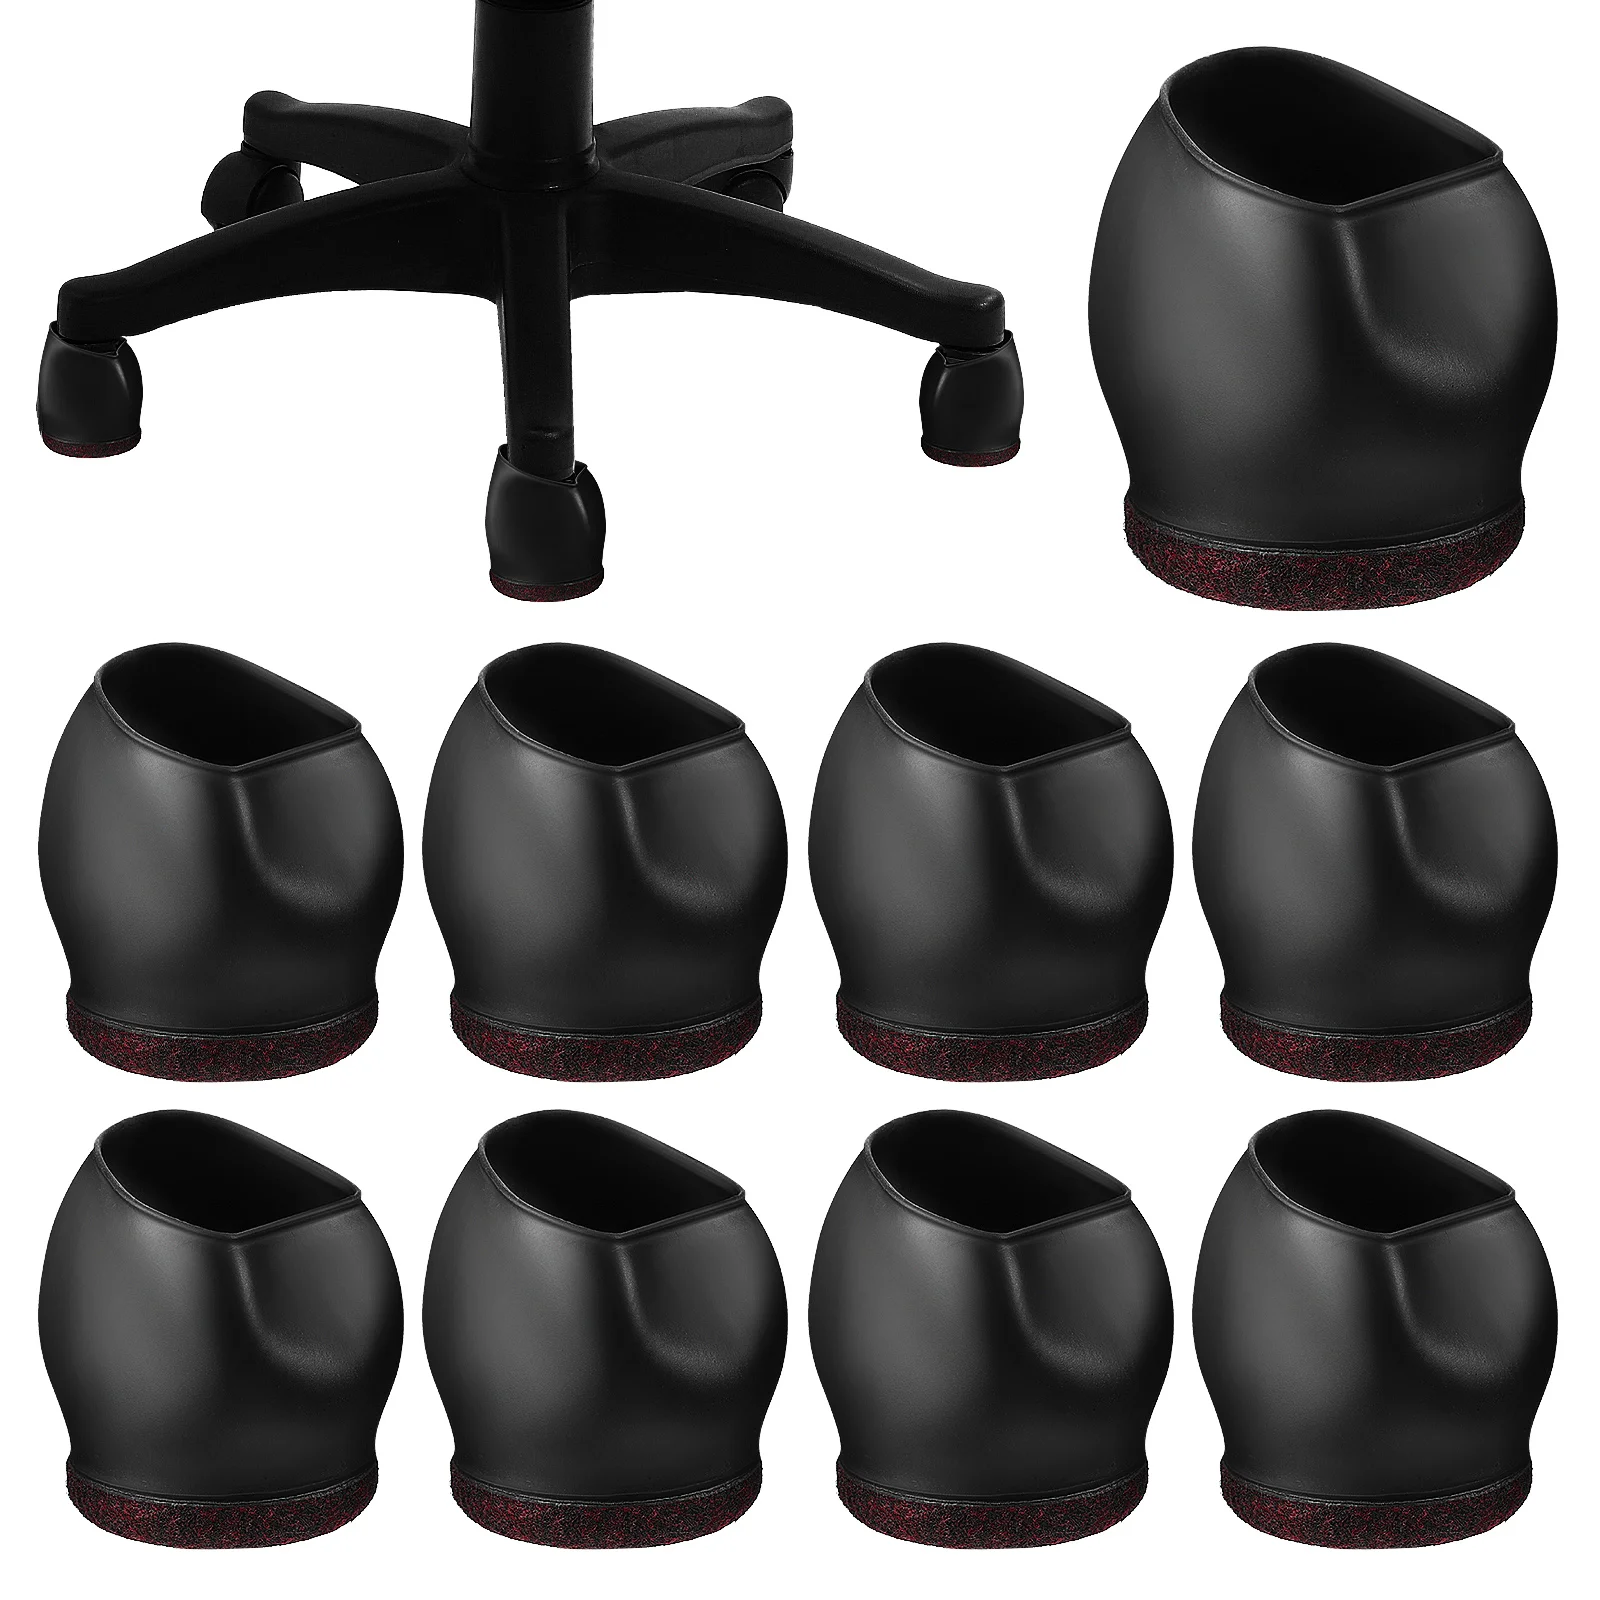 

10 Pcs Office Chair Wheel Stopper Caster Wheels Stoppers Rolling Chairs Cups Leg Covers Table Foot / Pad Carpet Protectors